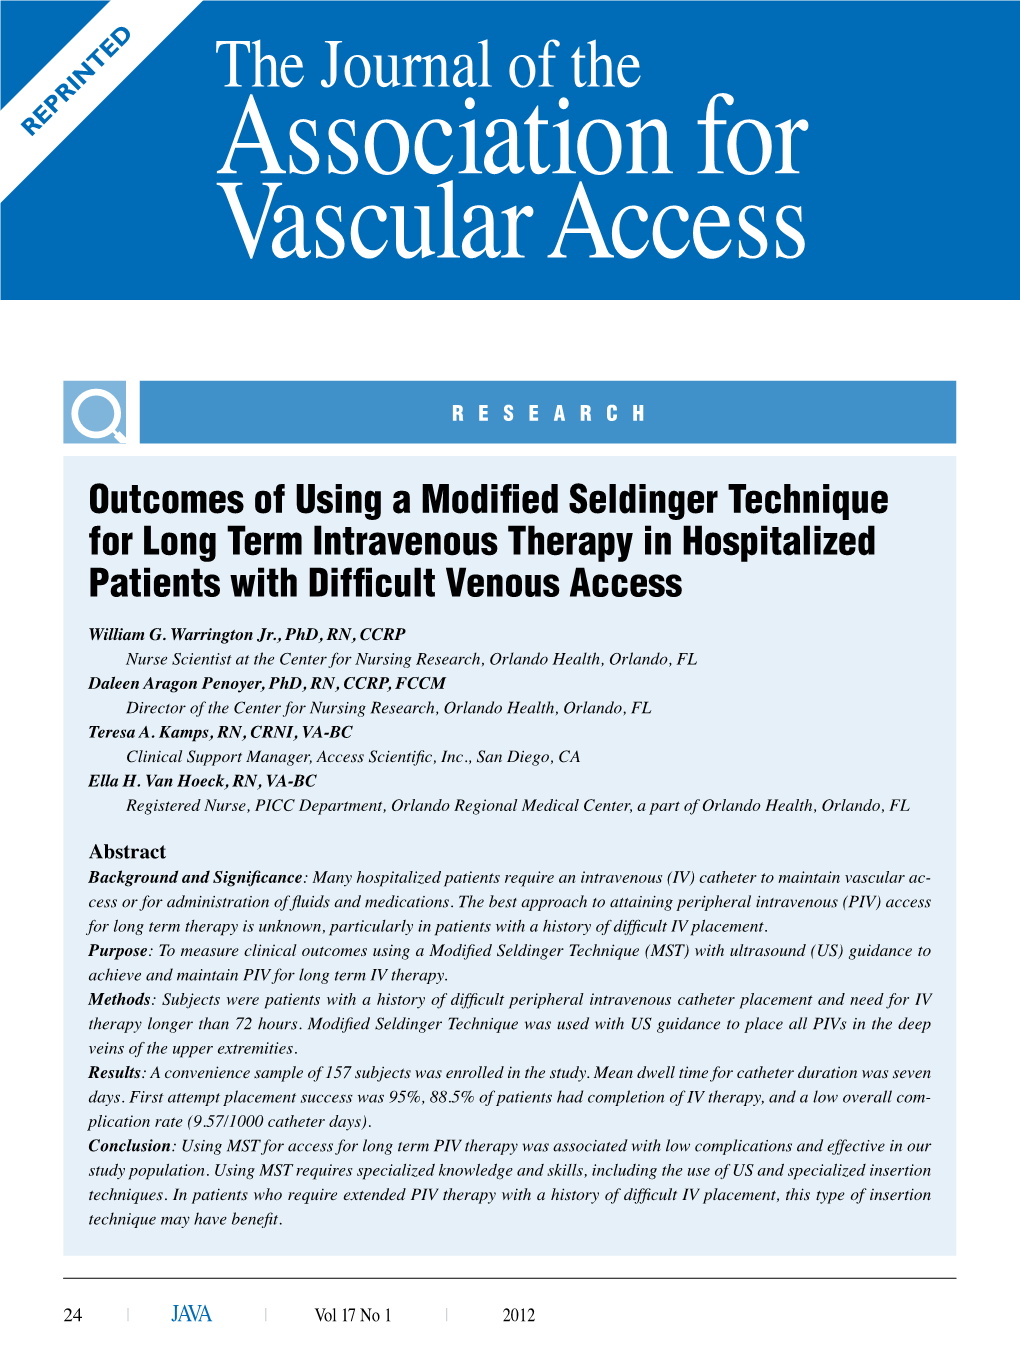 Outcomes of Using a Modified Seldinger Technique for Long Term Intravenous Therapy in Hospitalized Patients with Difficult Venous Access